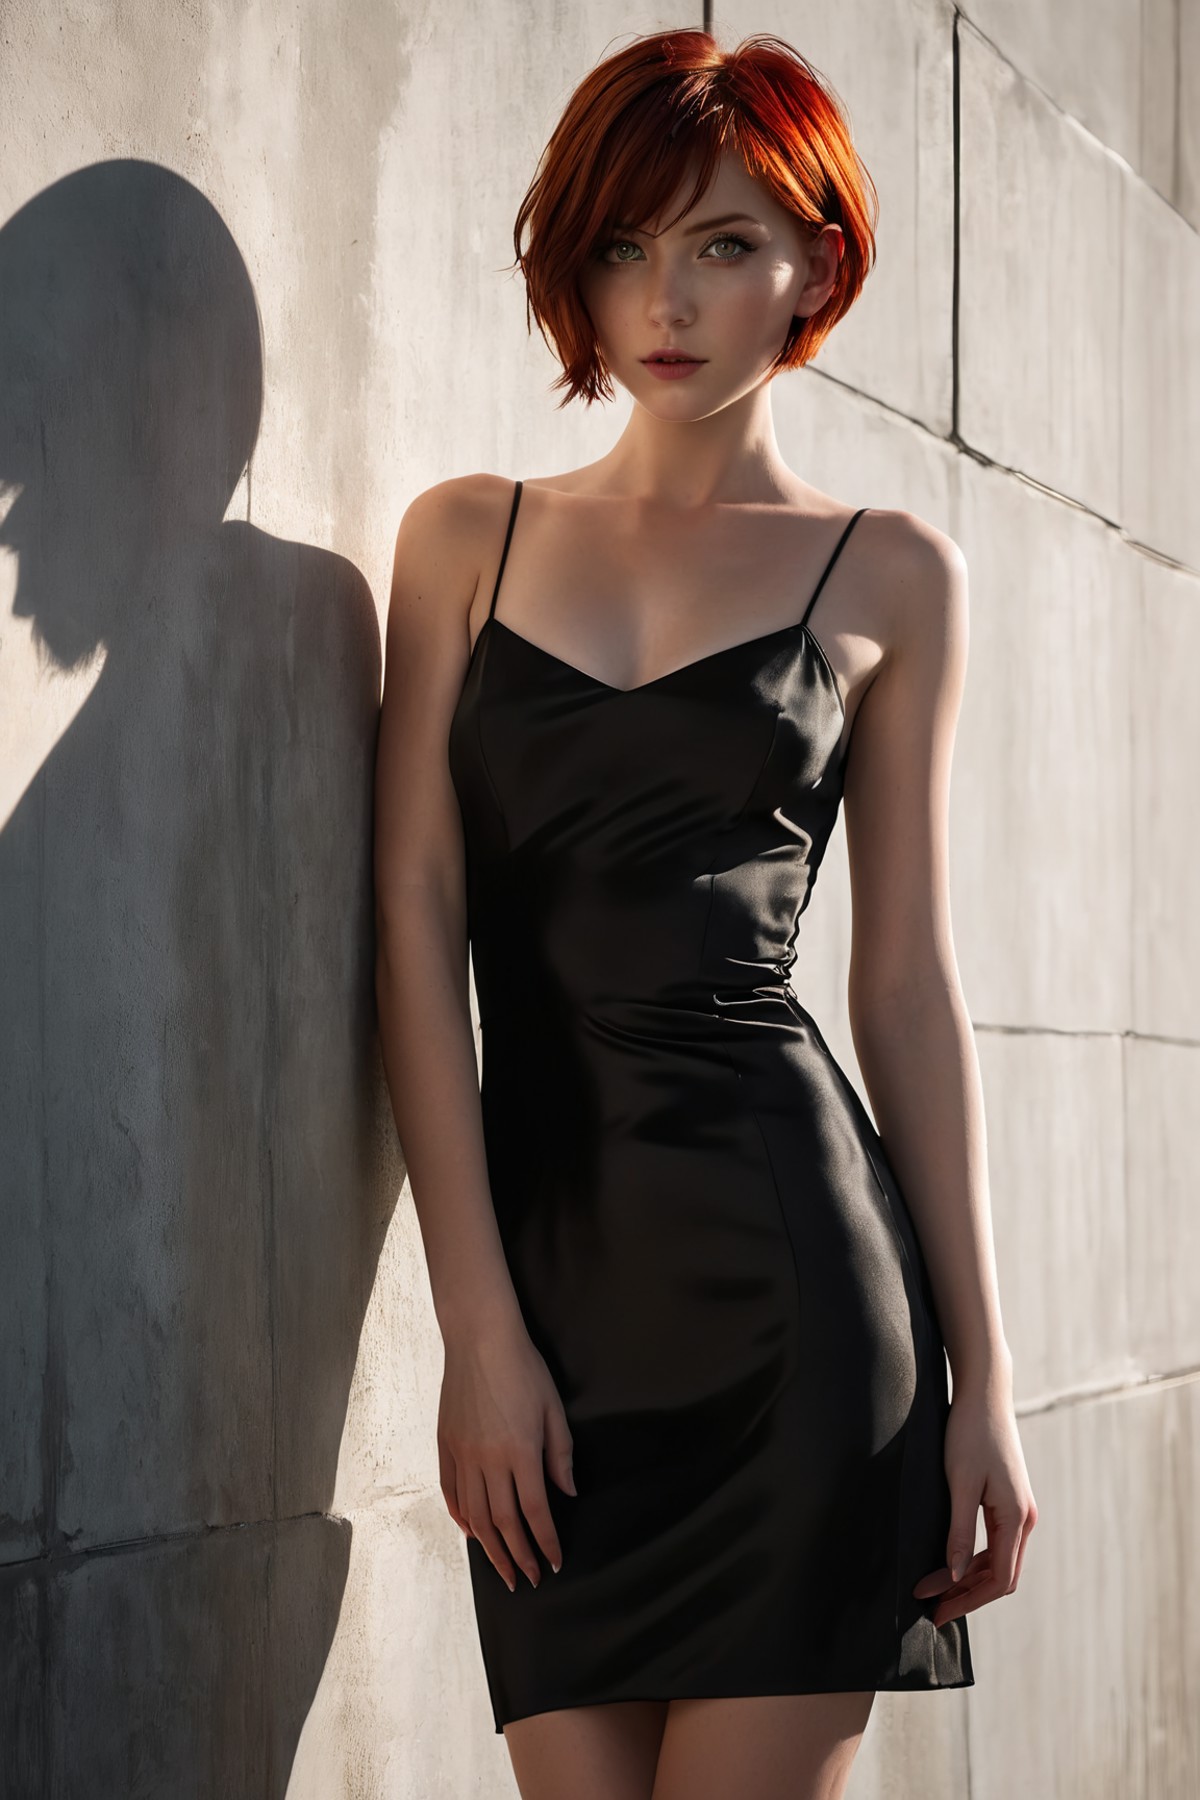 1 beautiful girl, details red eyes, short red hair, cool pose, concrete wall, slim body, small breasts, black satin sleeve...